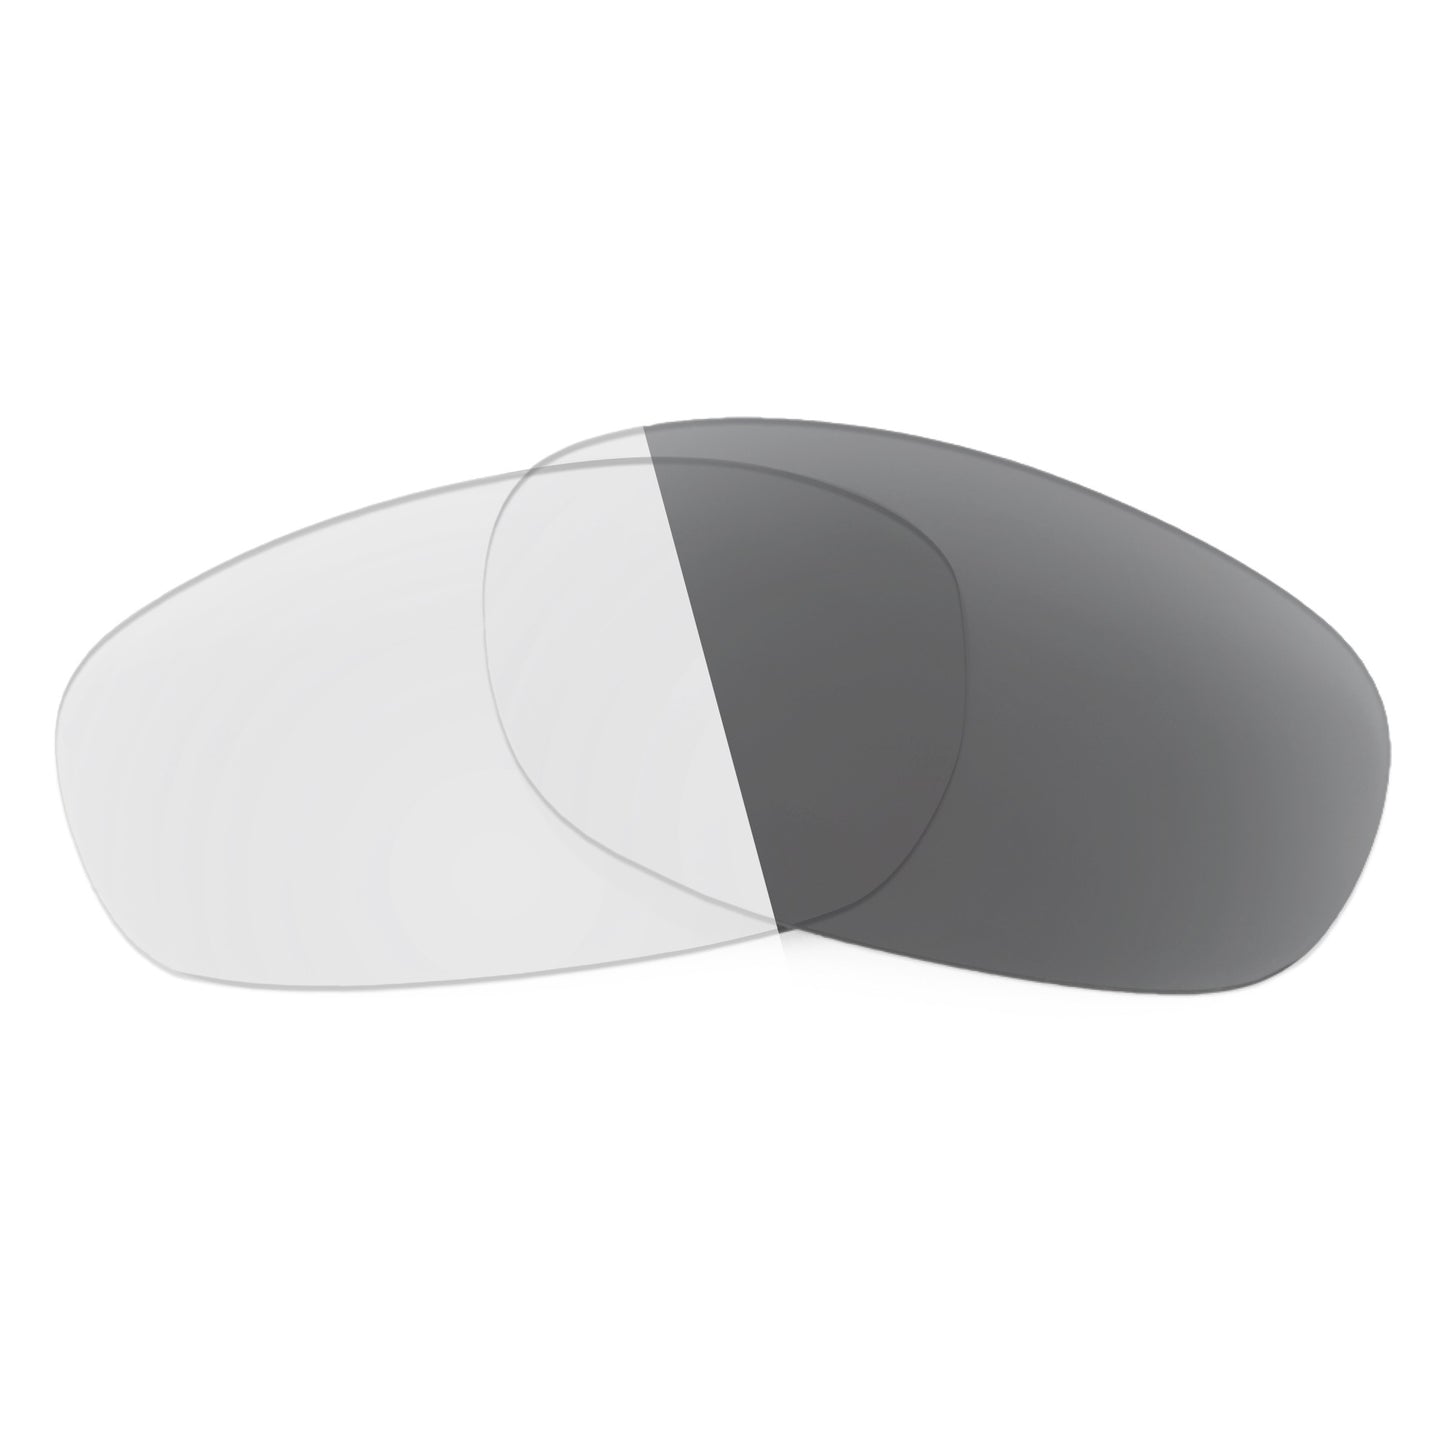 Revant replacement lenses for Ray-Ban RB3484 60mm Non-Polarized Adapt Gray Photochromic